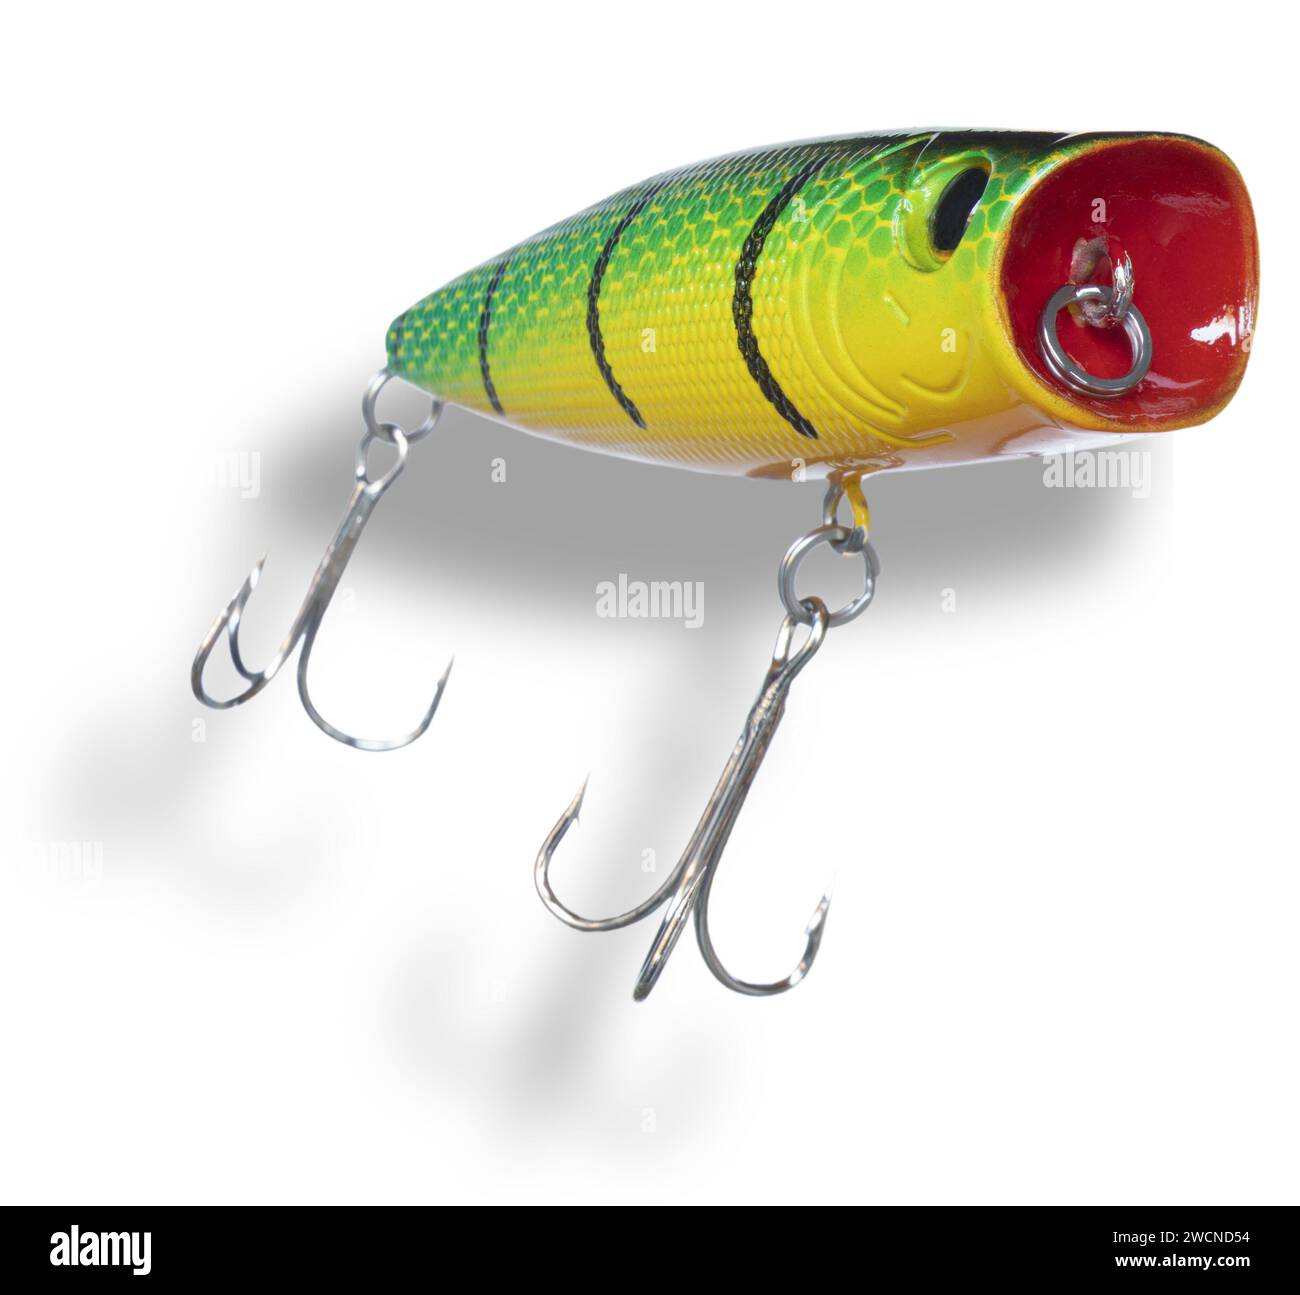 Shadow below a yellow and green artificial topwater fishing bait with red around the eyelet and wearing two treble hooks seen from a steep angle. Stock Photo